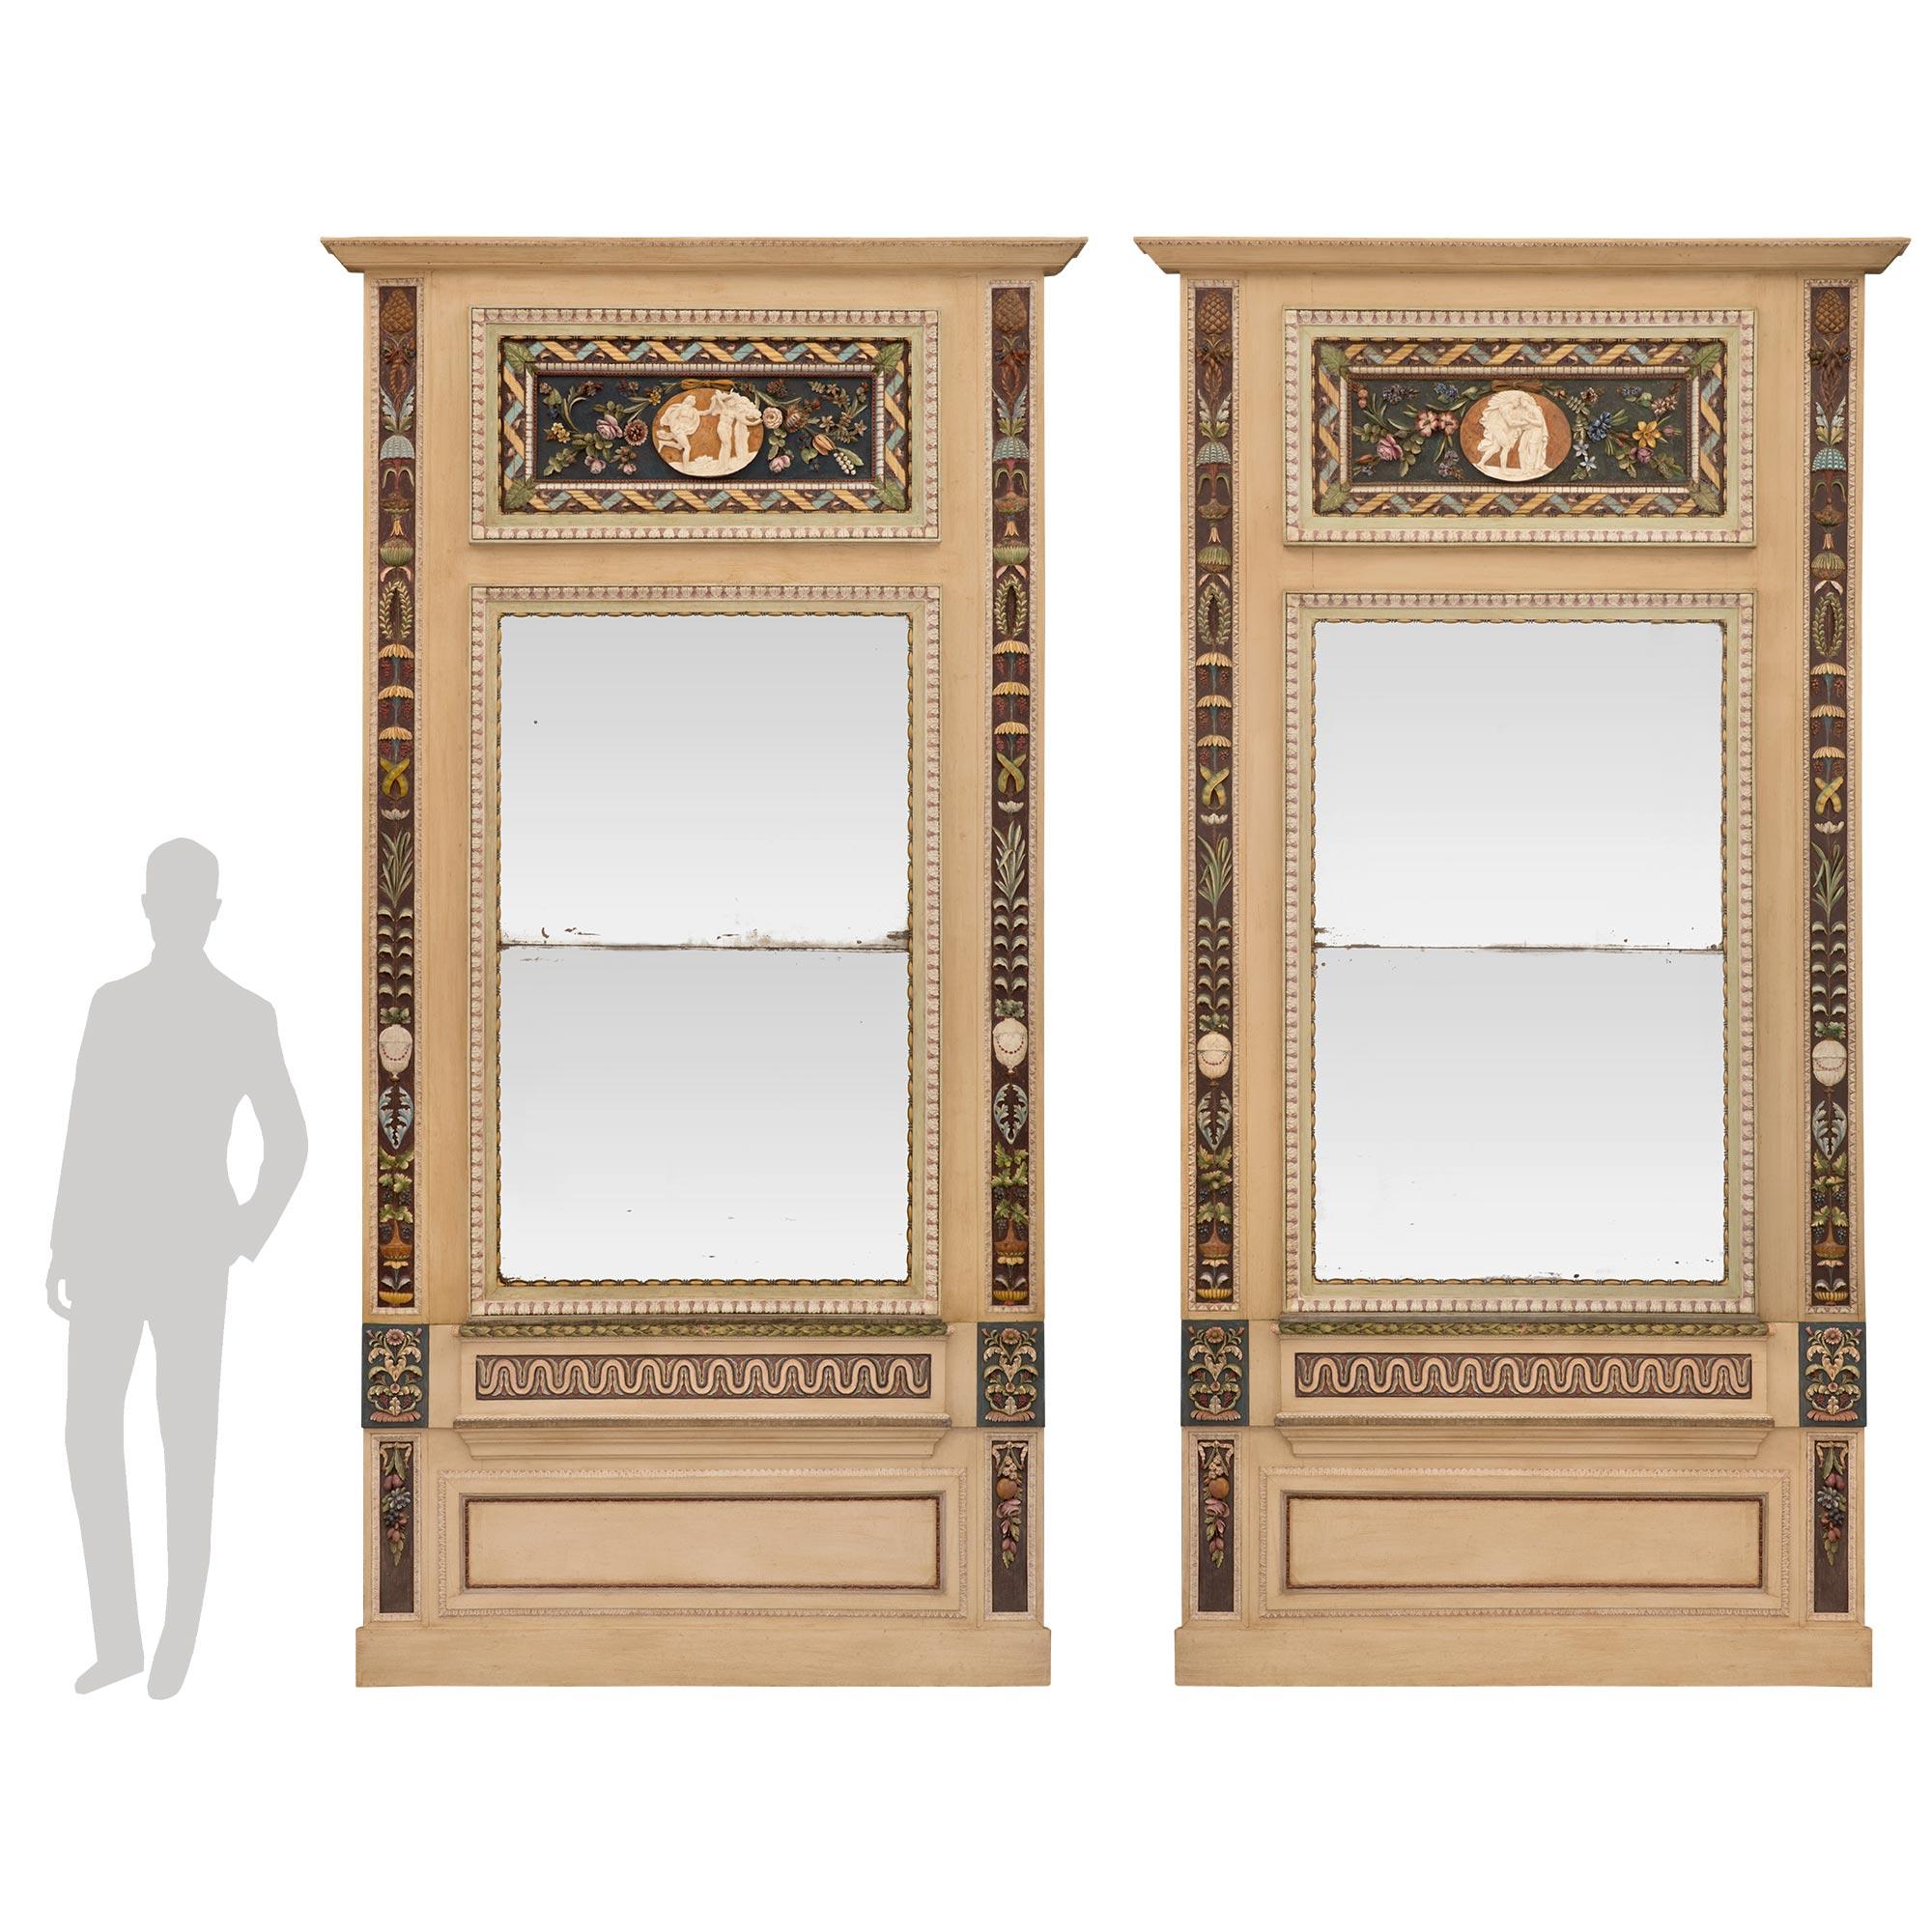 A stunning and extremely decorative large scale true pair of Italian early 19th century neo-classical st. patinated wood trumeau mirrors. Each mirror is raised by an elegant mottled base below a recessed panel framed within a fine foliate border